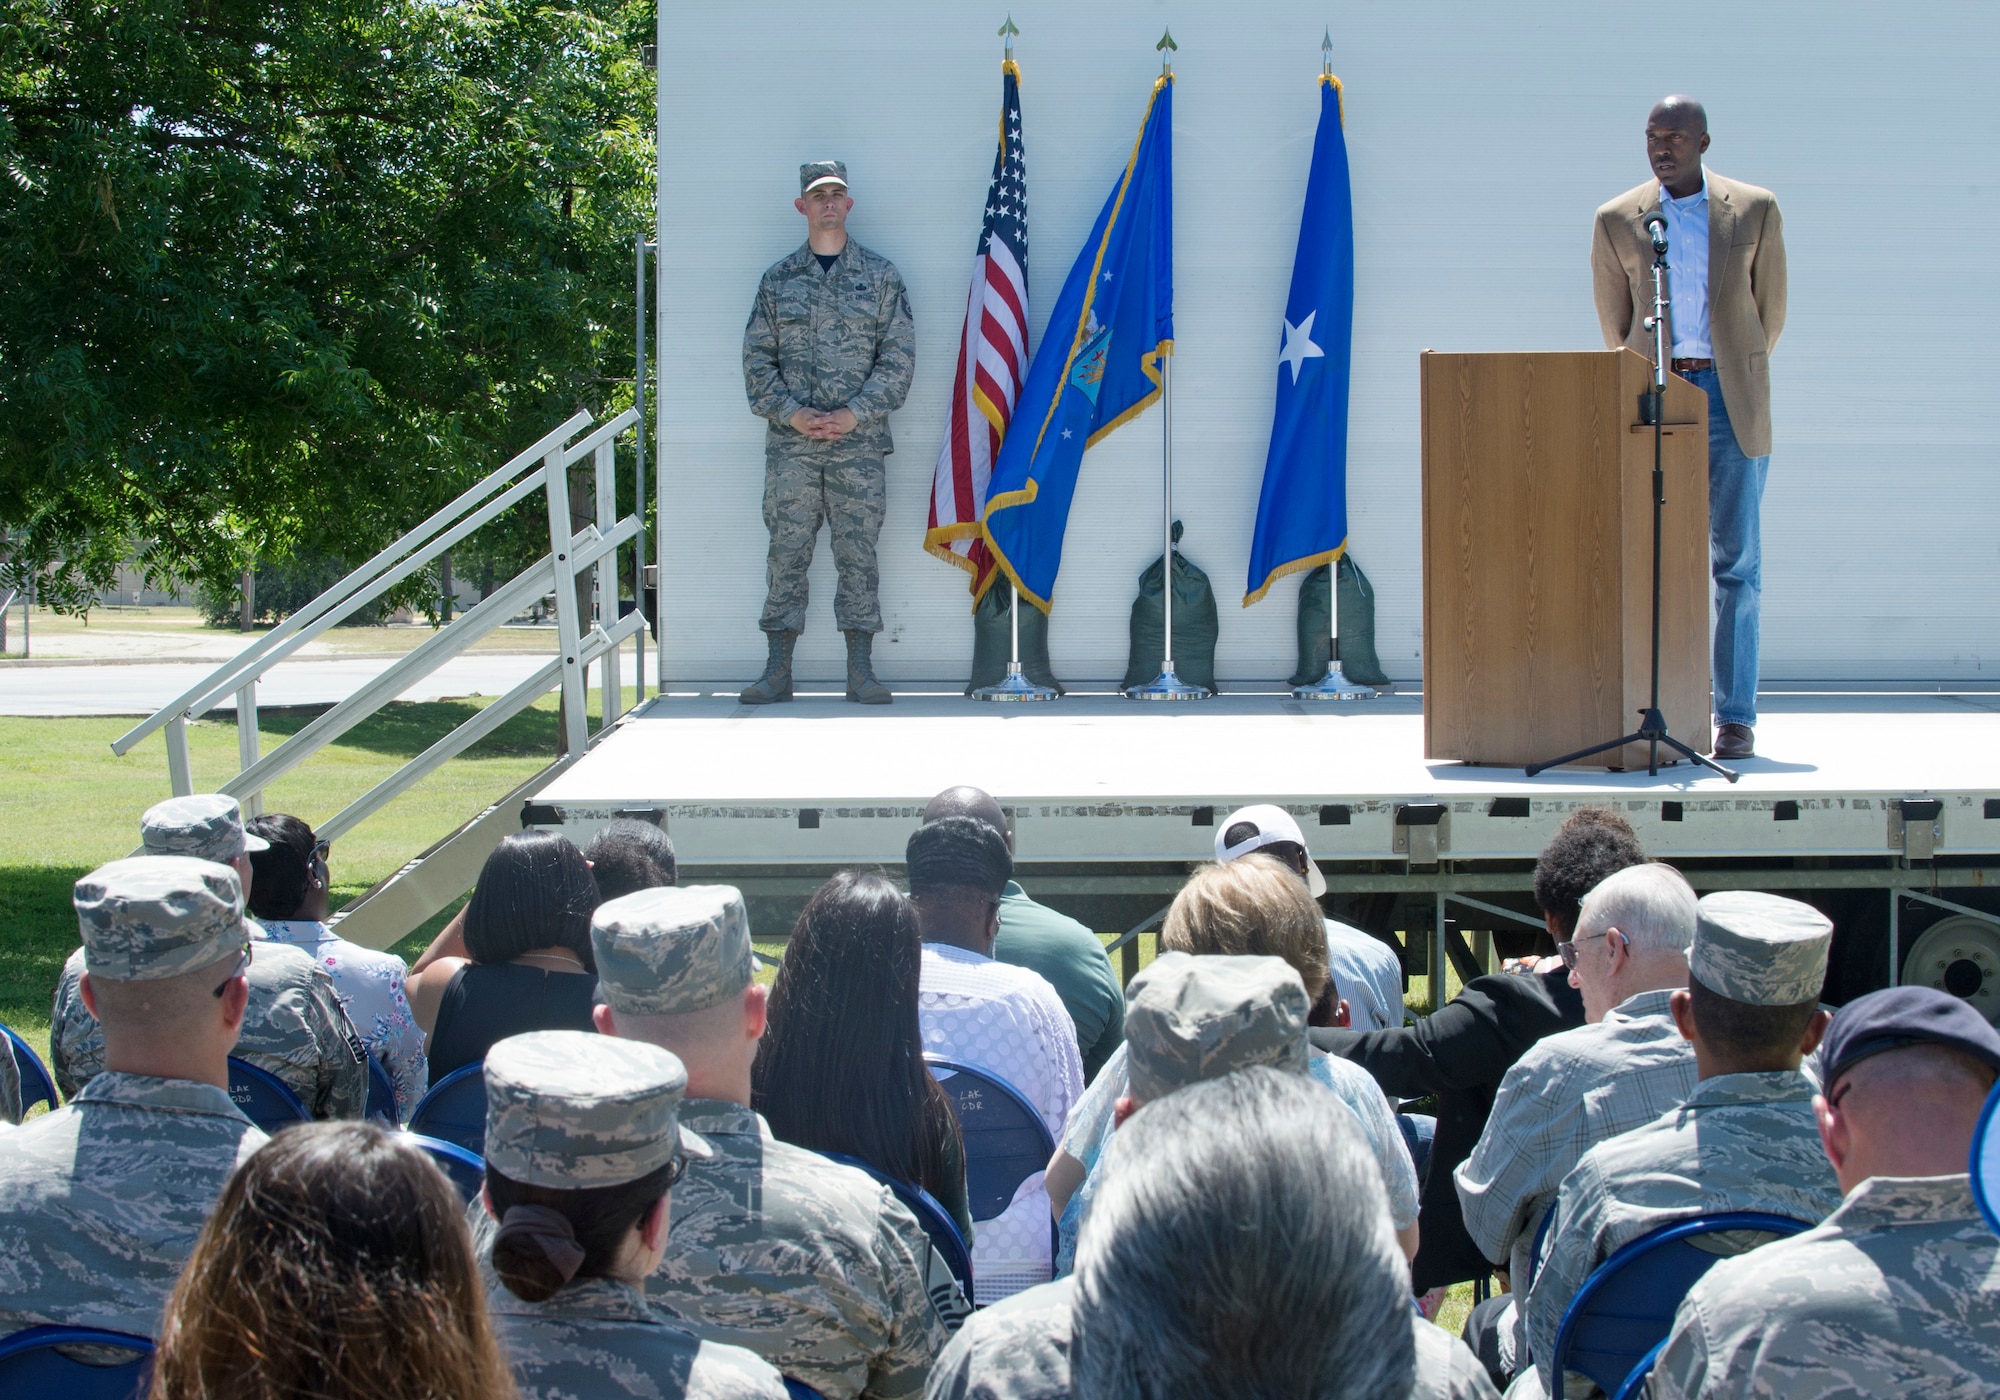 Larry Rogers, father of the late Staff Sgt. Cierra Rogers, talks about Cierra during the Joint Base San Antonio Airman Leadership School naming ceremony in her honor at JBSA-Lackland, Texas, May 11, 2018. Cierra, a school alumnus, died May 20, 2016 from injuries sustained after saving a family from a burning building April 29, 2016. (U.S. Air Force photo by Tech. Sgt. R.J. Biermann)